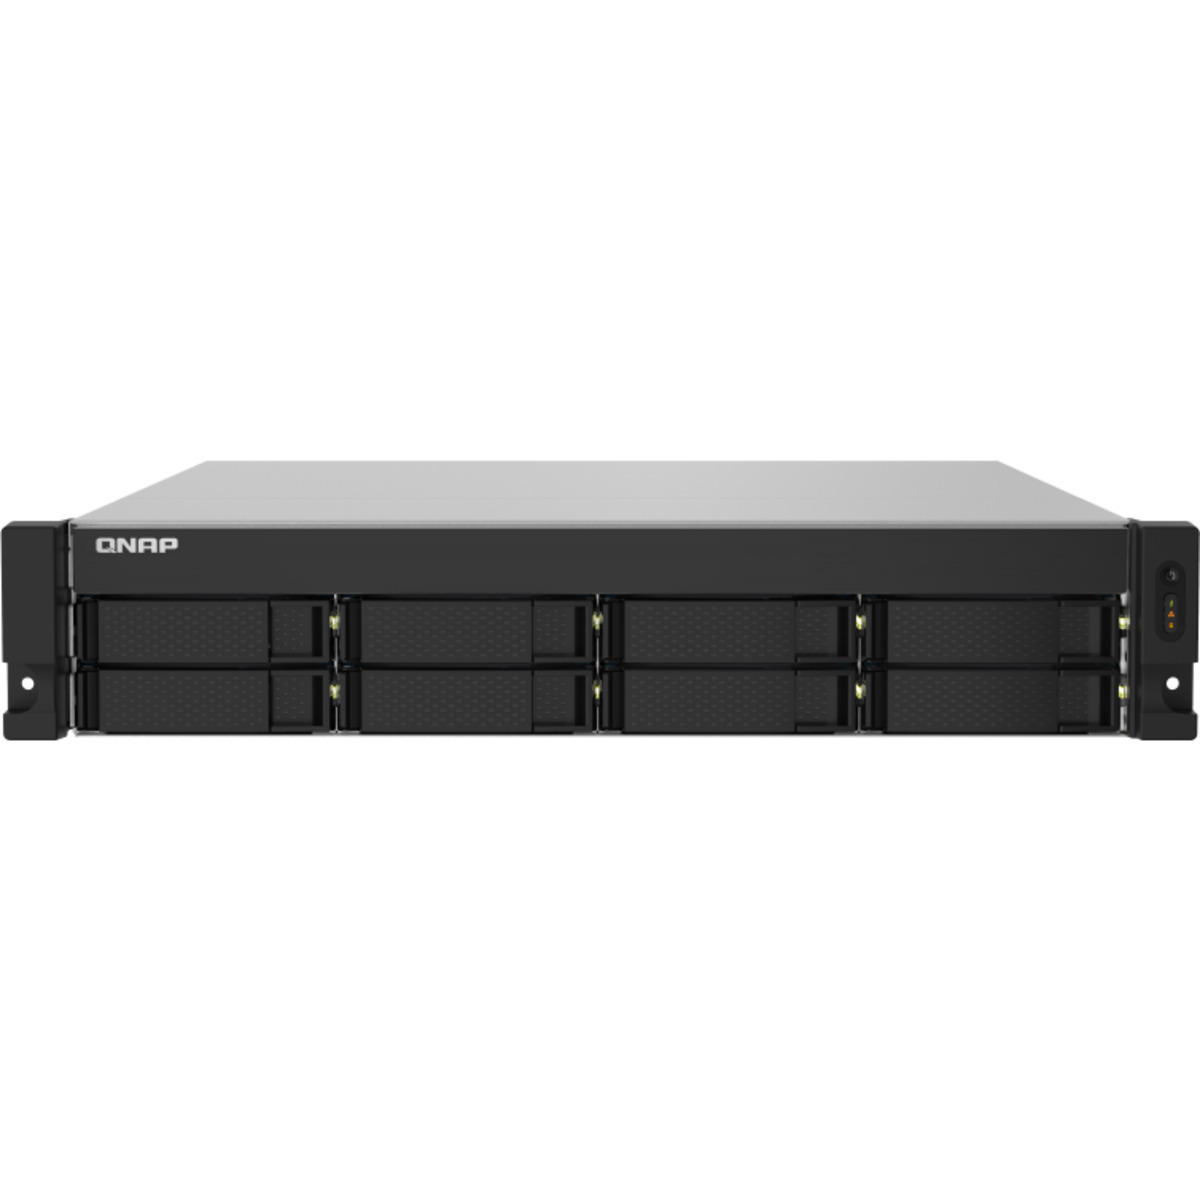 QNAP TS-832PXU-RP 32tb 8-Bay RackMount Personal / Basic Home / Small Office NAS - Network Attached Storage Device 8x4tb Western Digital Ultrastar DC HC310 HUS726T4TALE6L4 3.5 7200rpm SATA 6Gb/s HDD ENTERPRISE Class Drives Installed - Burn-In Tested - FREE RAM UPGRADE TS-832PXU-RP